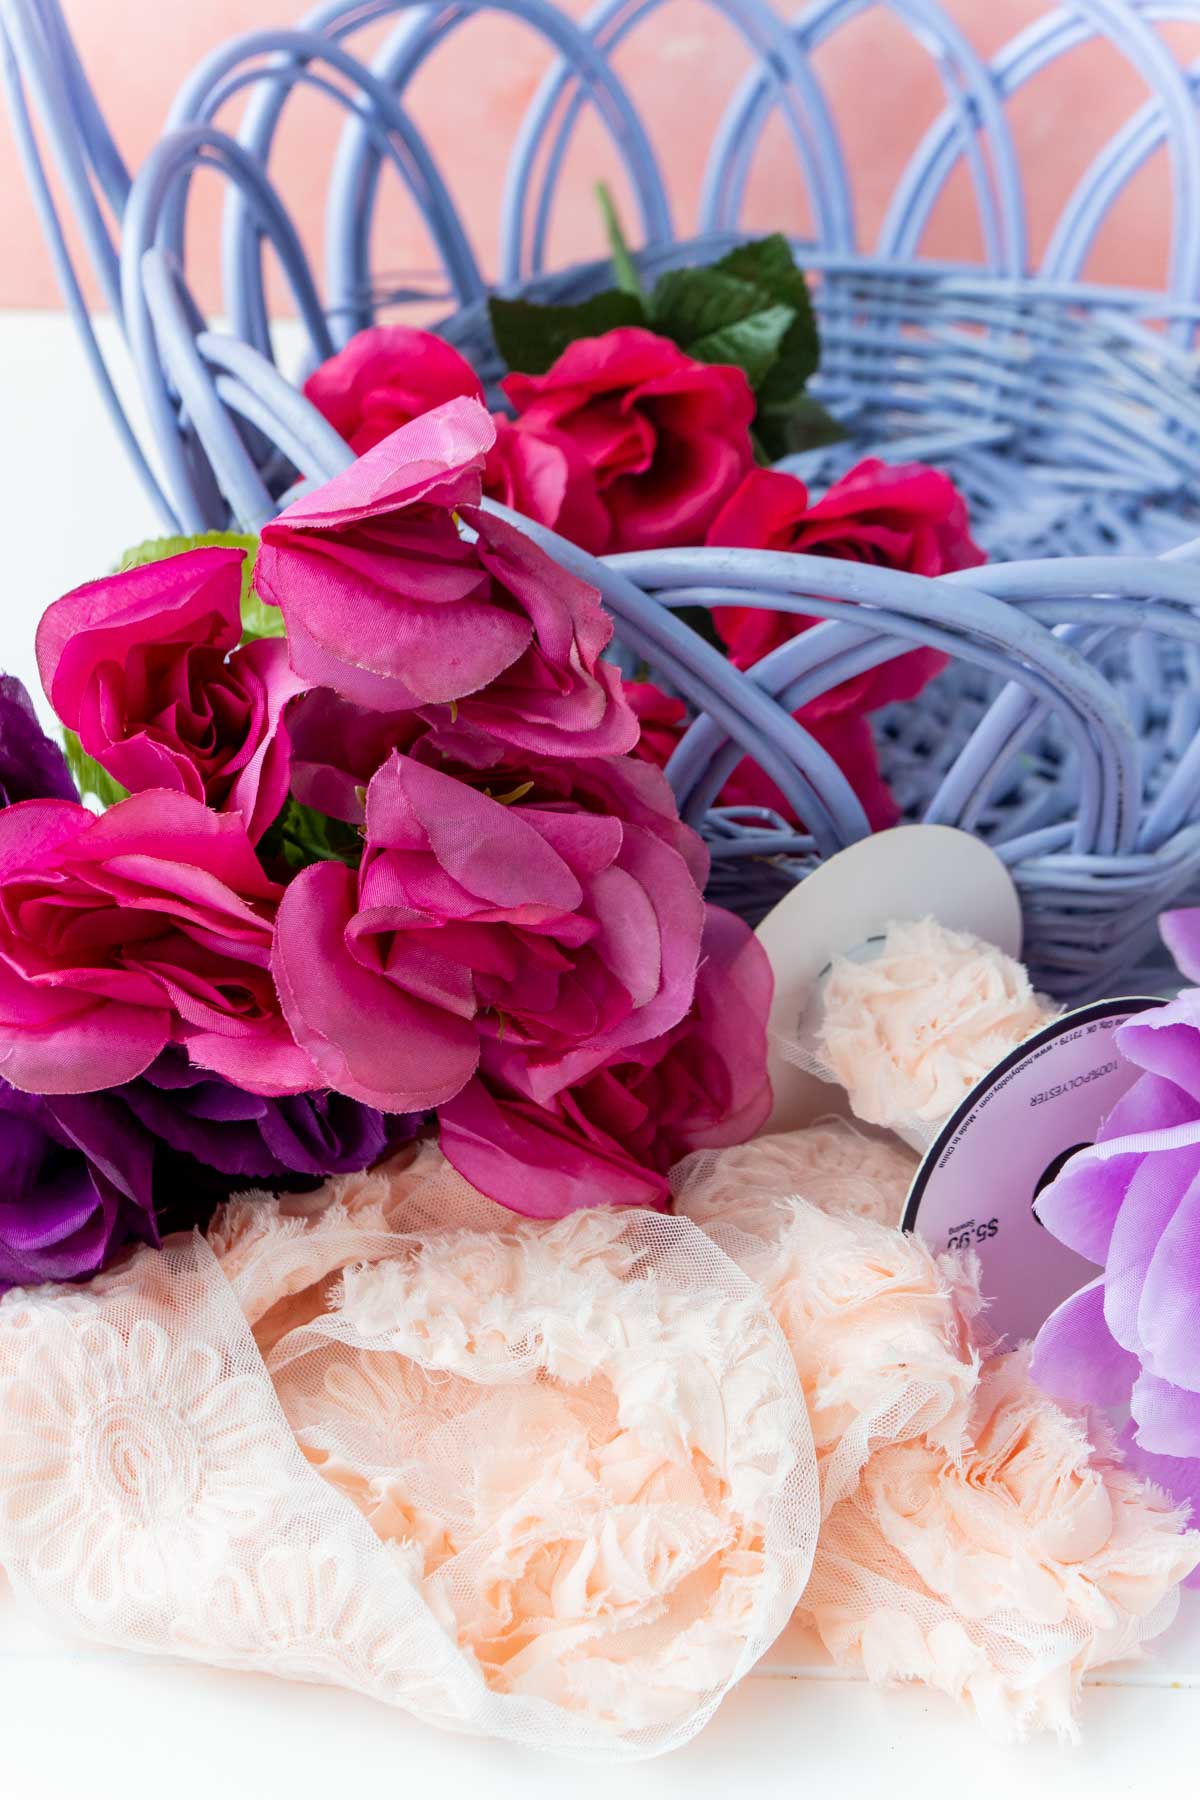 Flowers and rose ribbon by an Easter basket